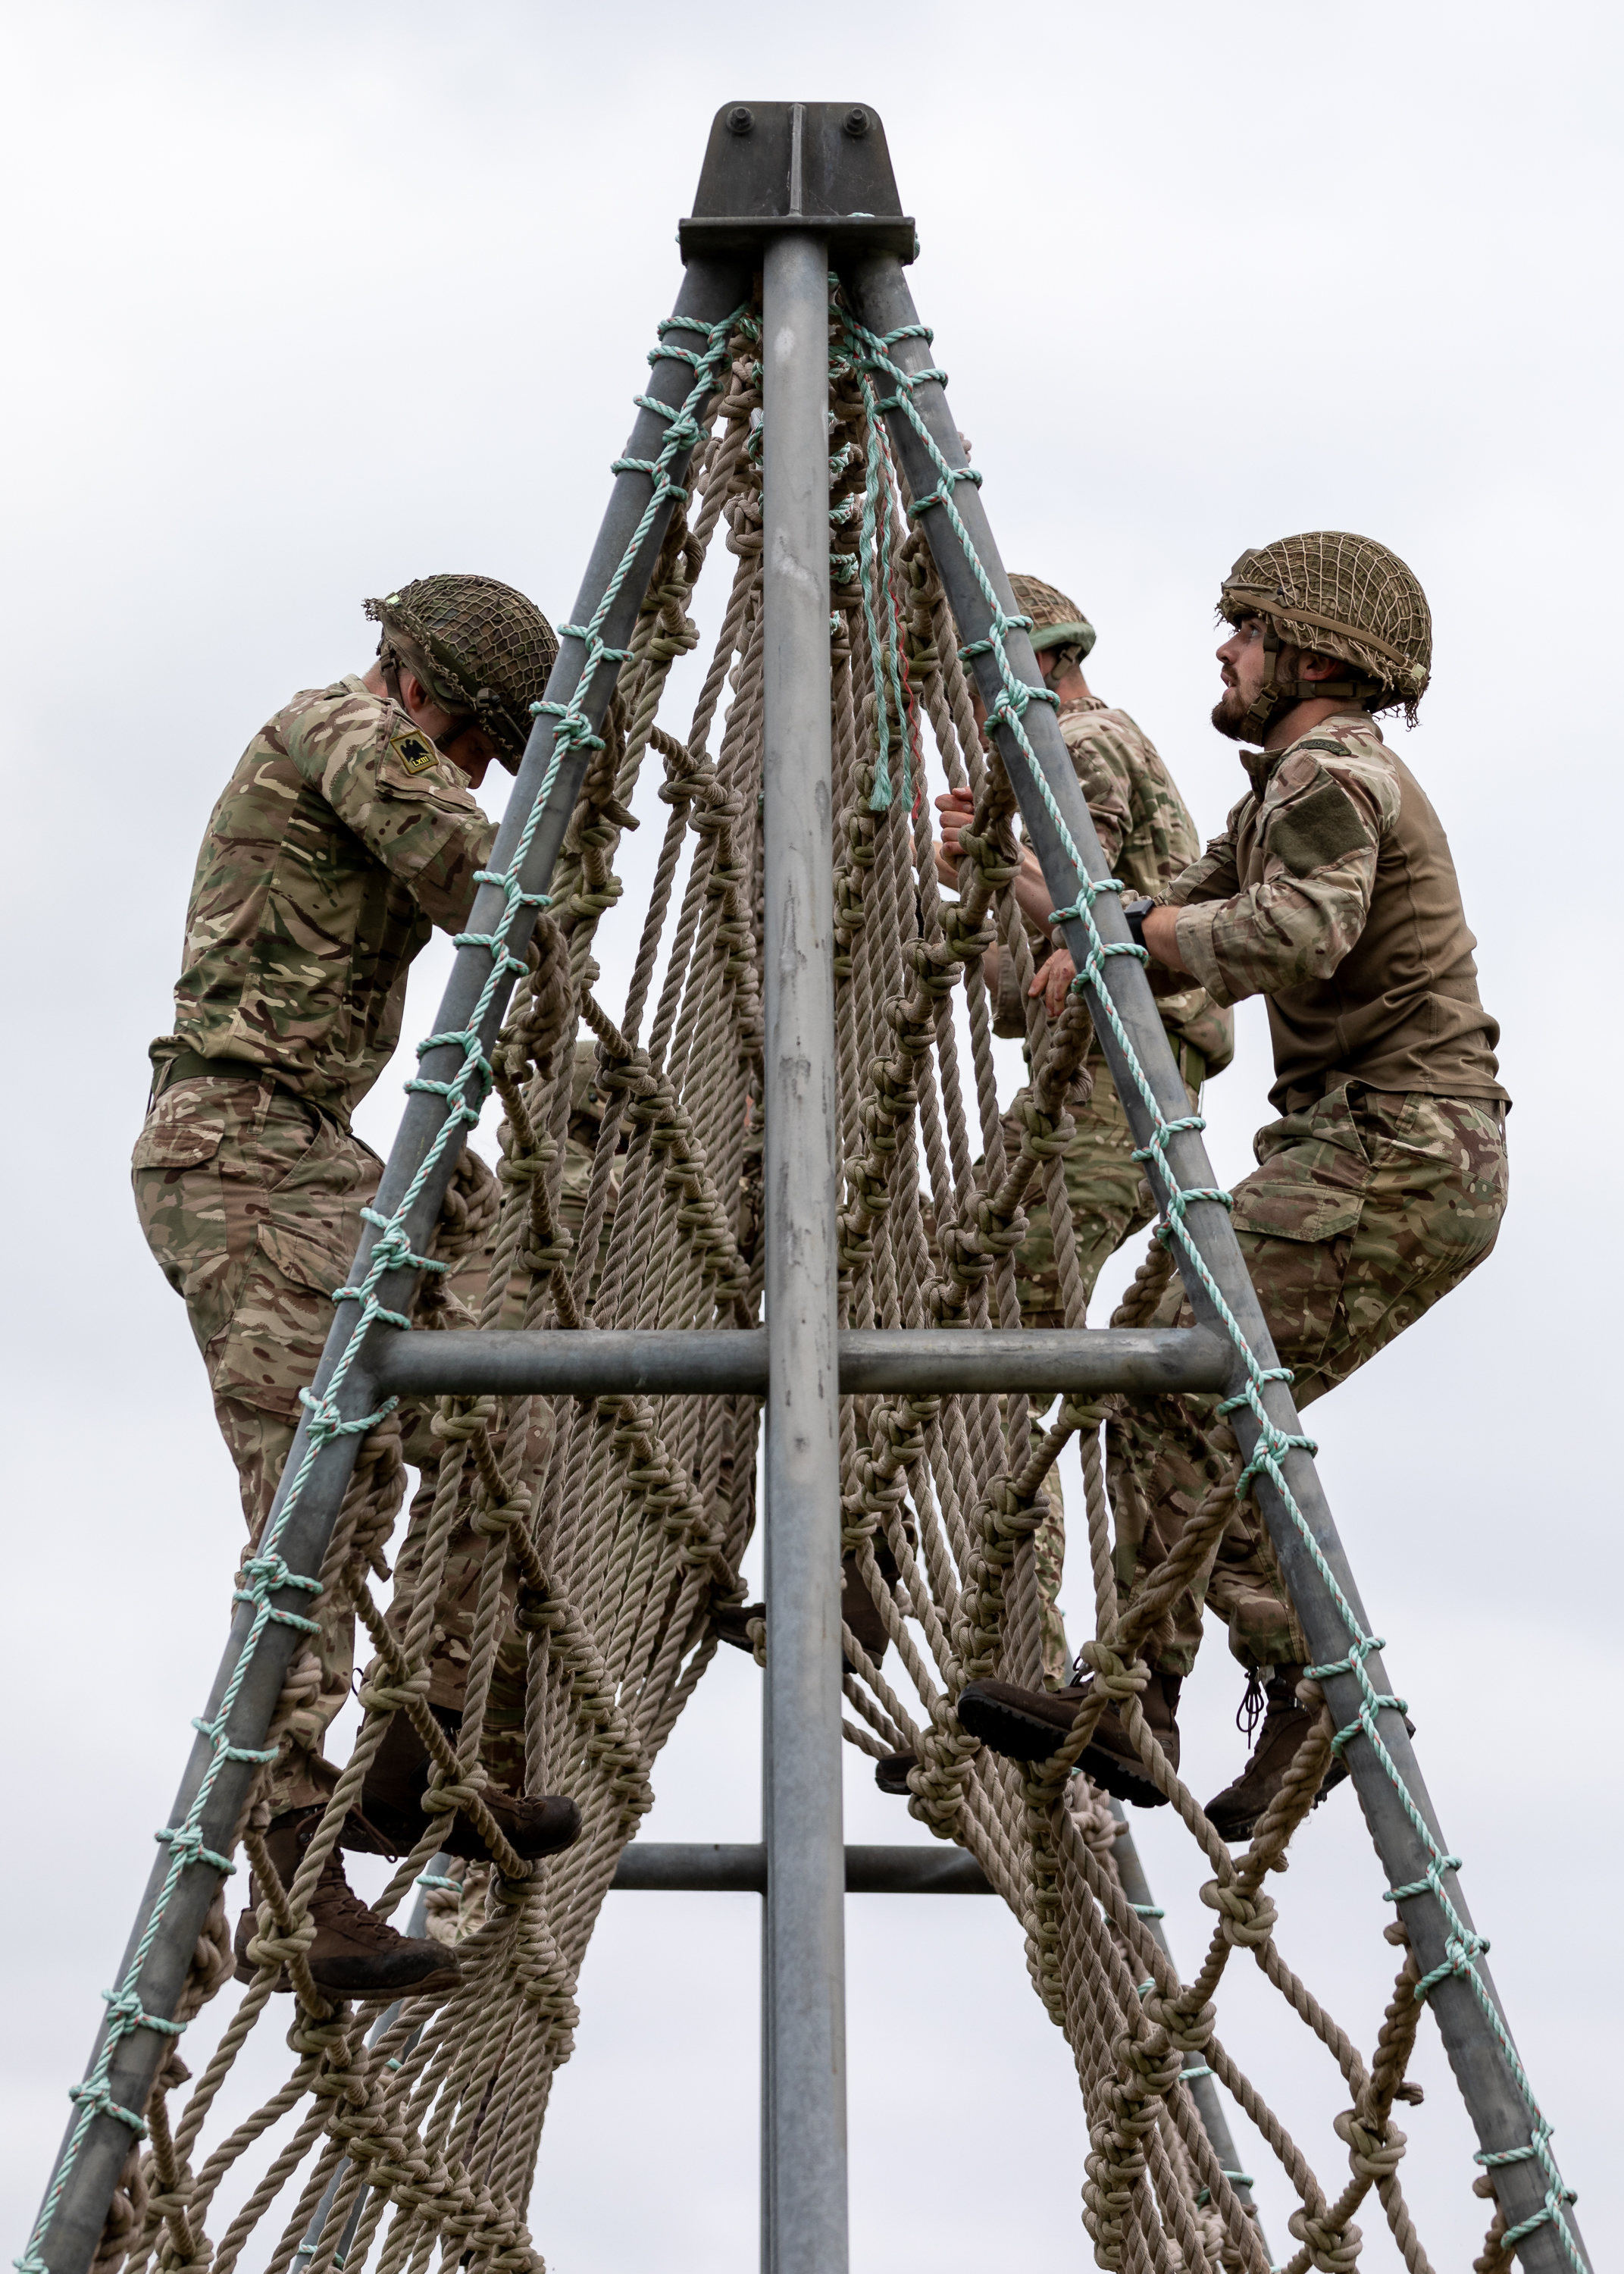 Personnel climbing a rope frame in the Assault Course.